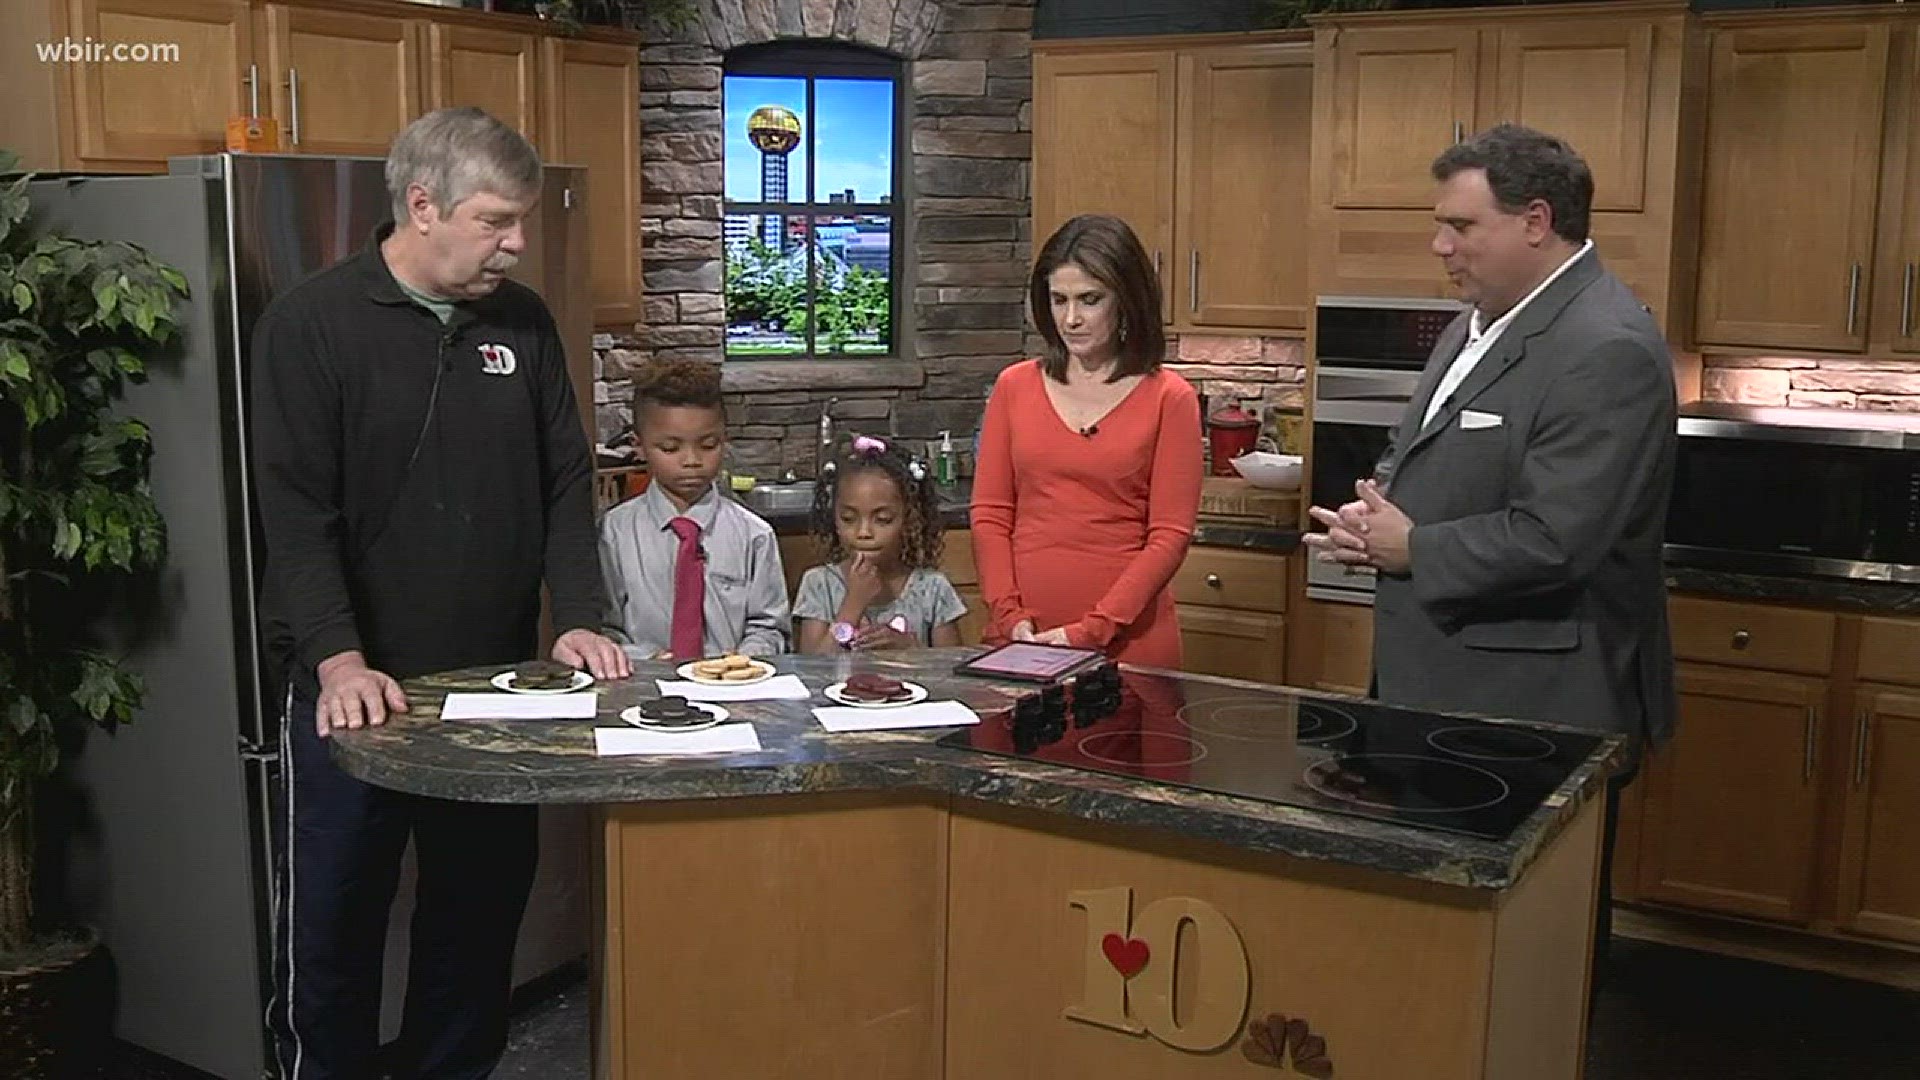 Our Junior anchor and her twin brother join Ed Rupp in a taste test in honor of Oreo cookie day.,March 6, 2018-4pm